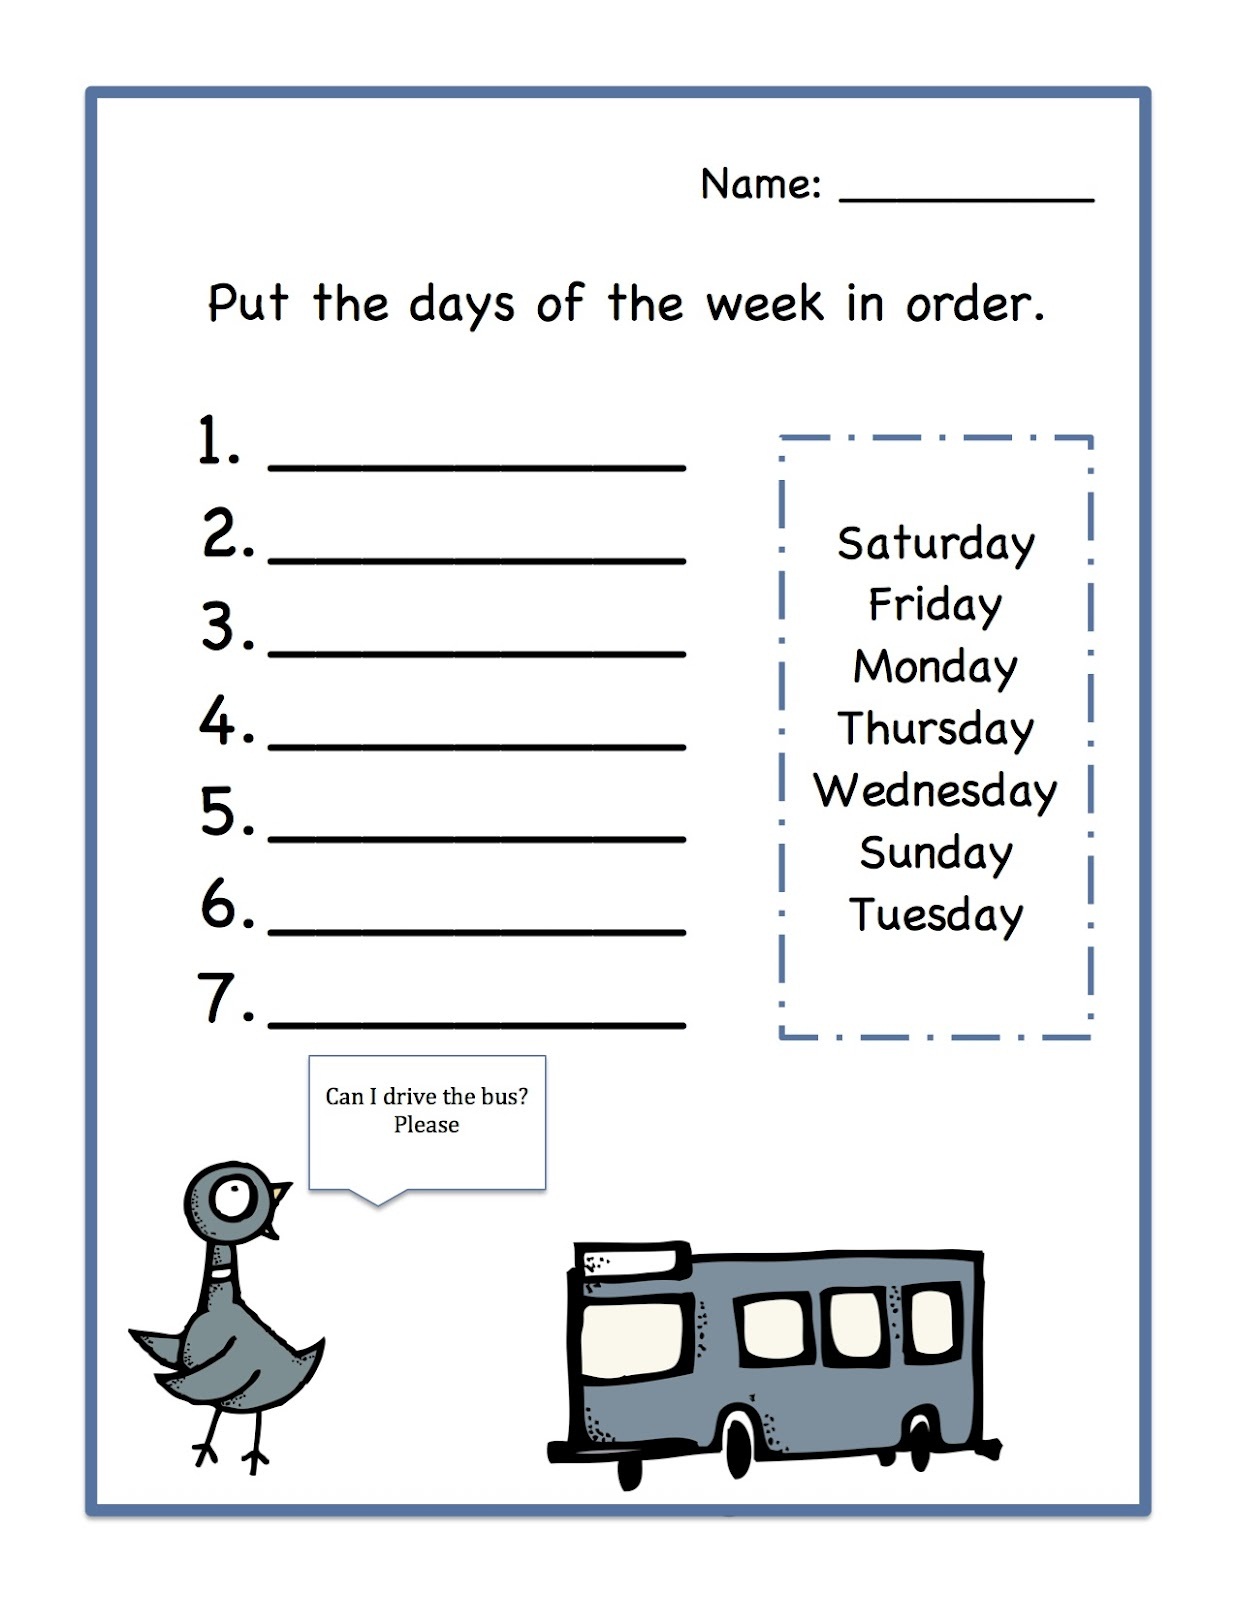 days-of-the-week-worksheets-activity-shelter